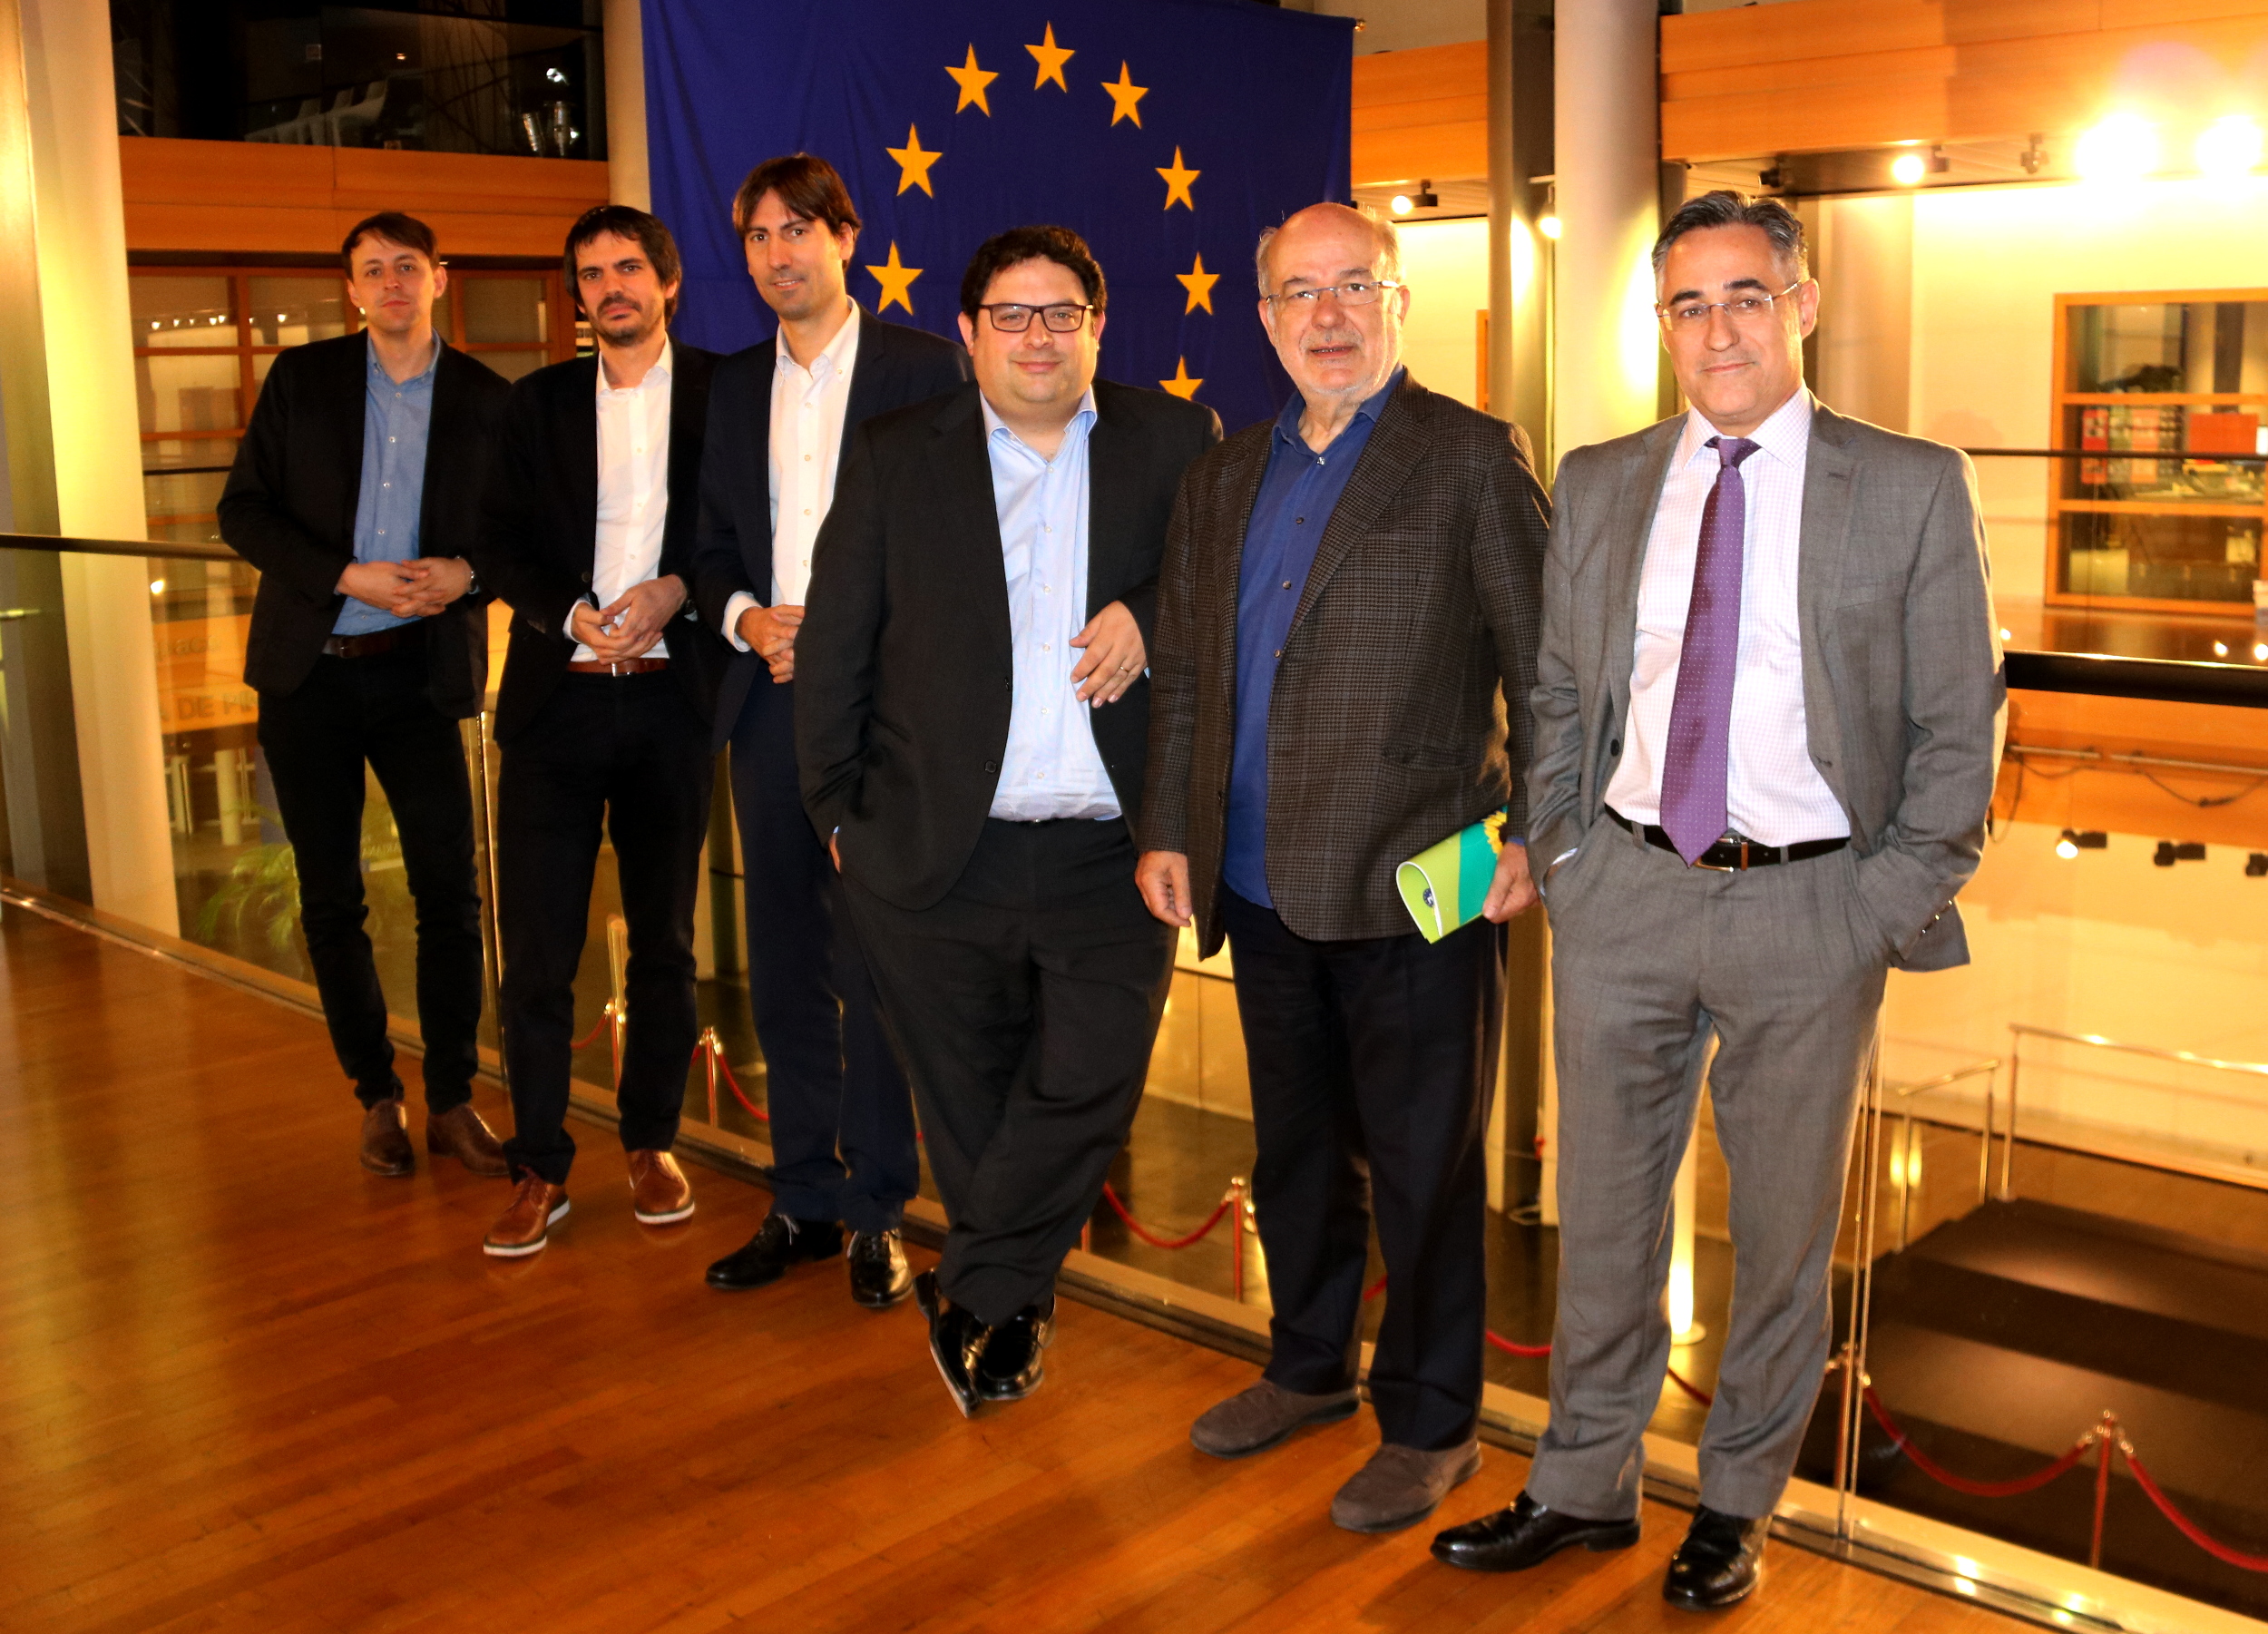 The Catalan MEPs in front of the European flag (by ACN)